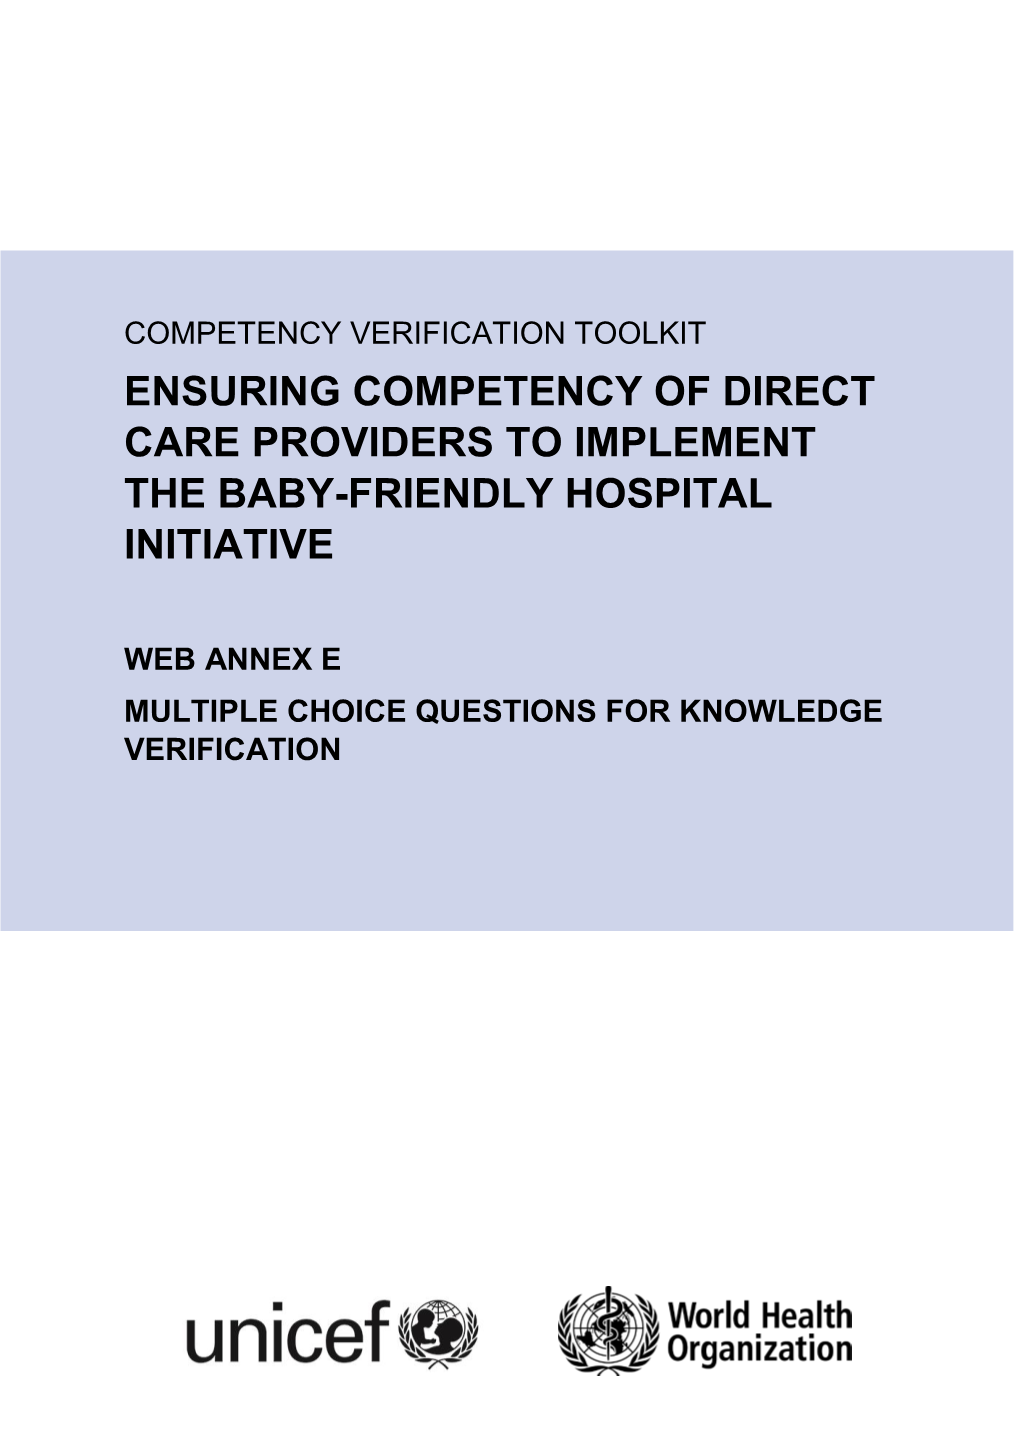 Ensuring Competency of Direct Care Providers to Implement the Baby-Friendly Hospital Initiative